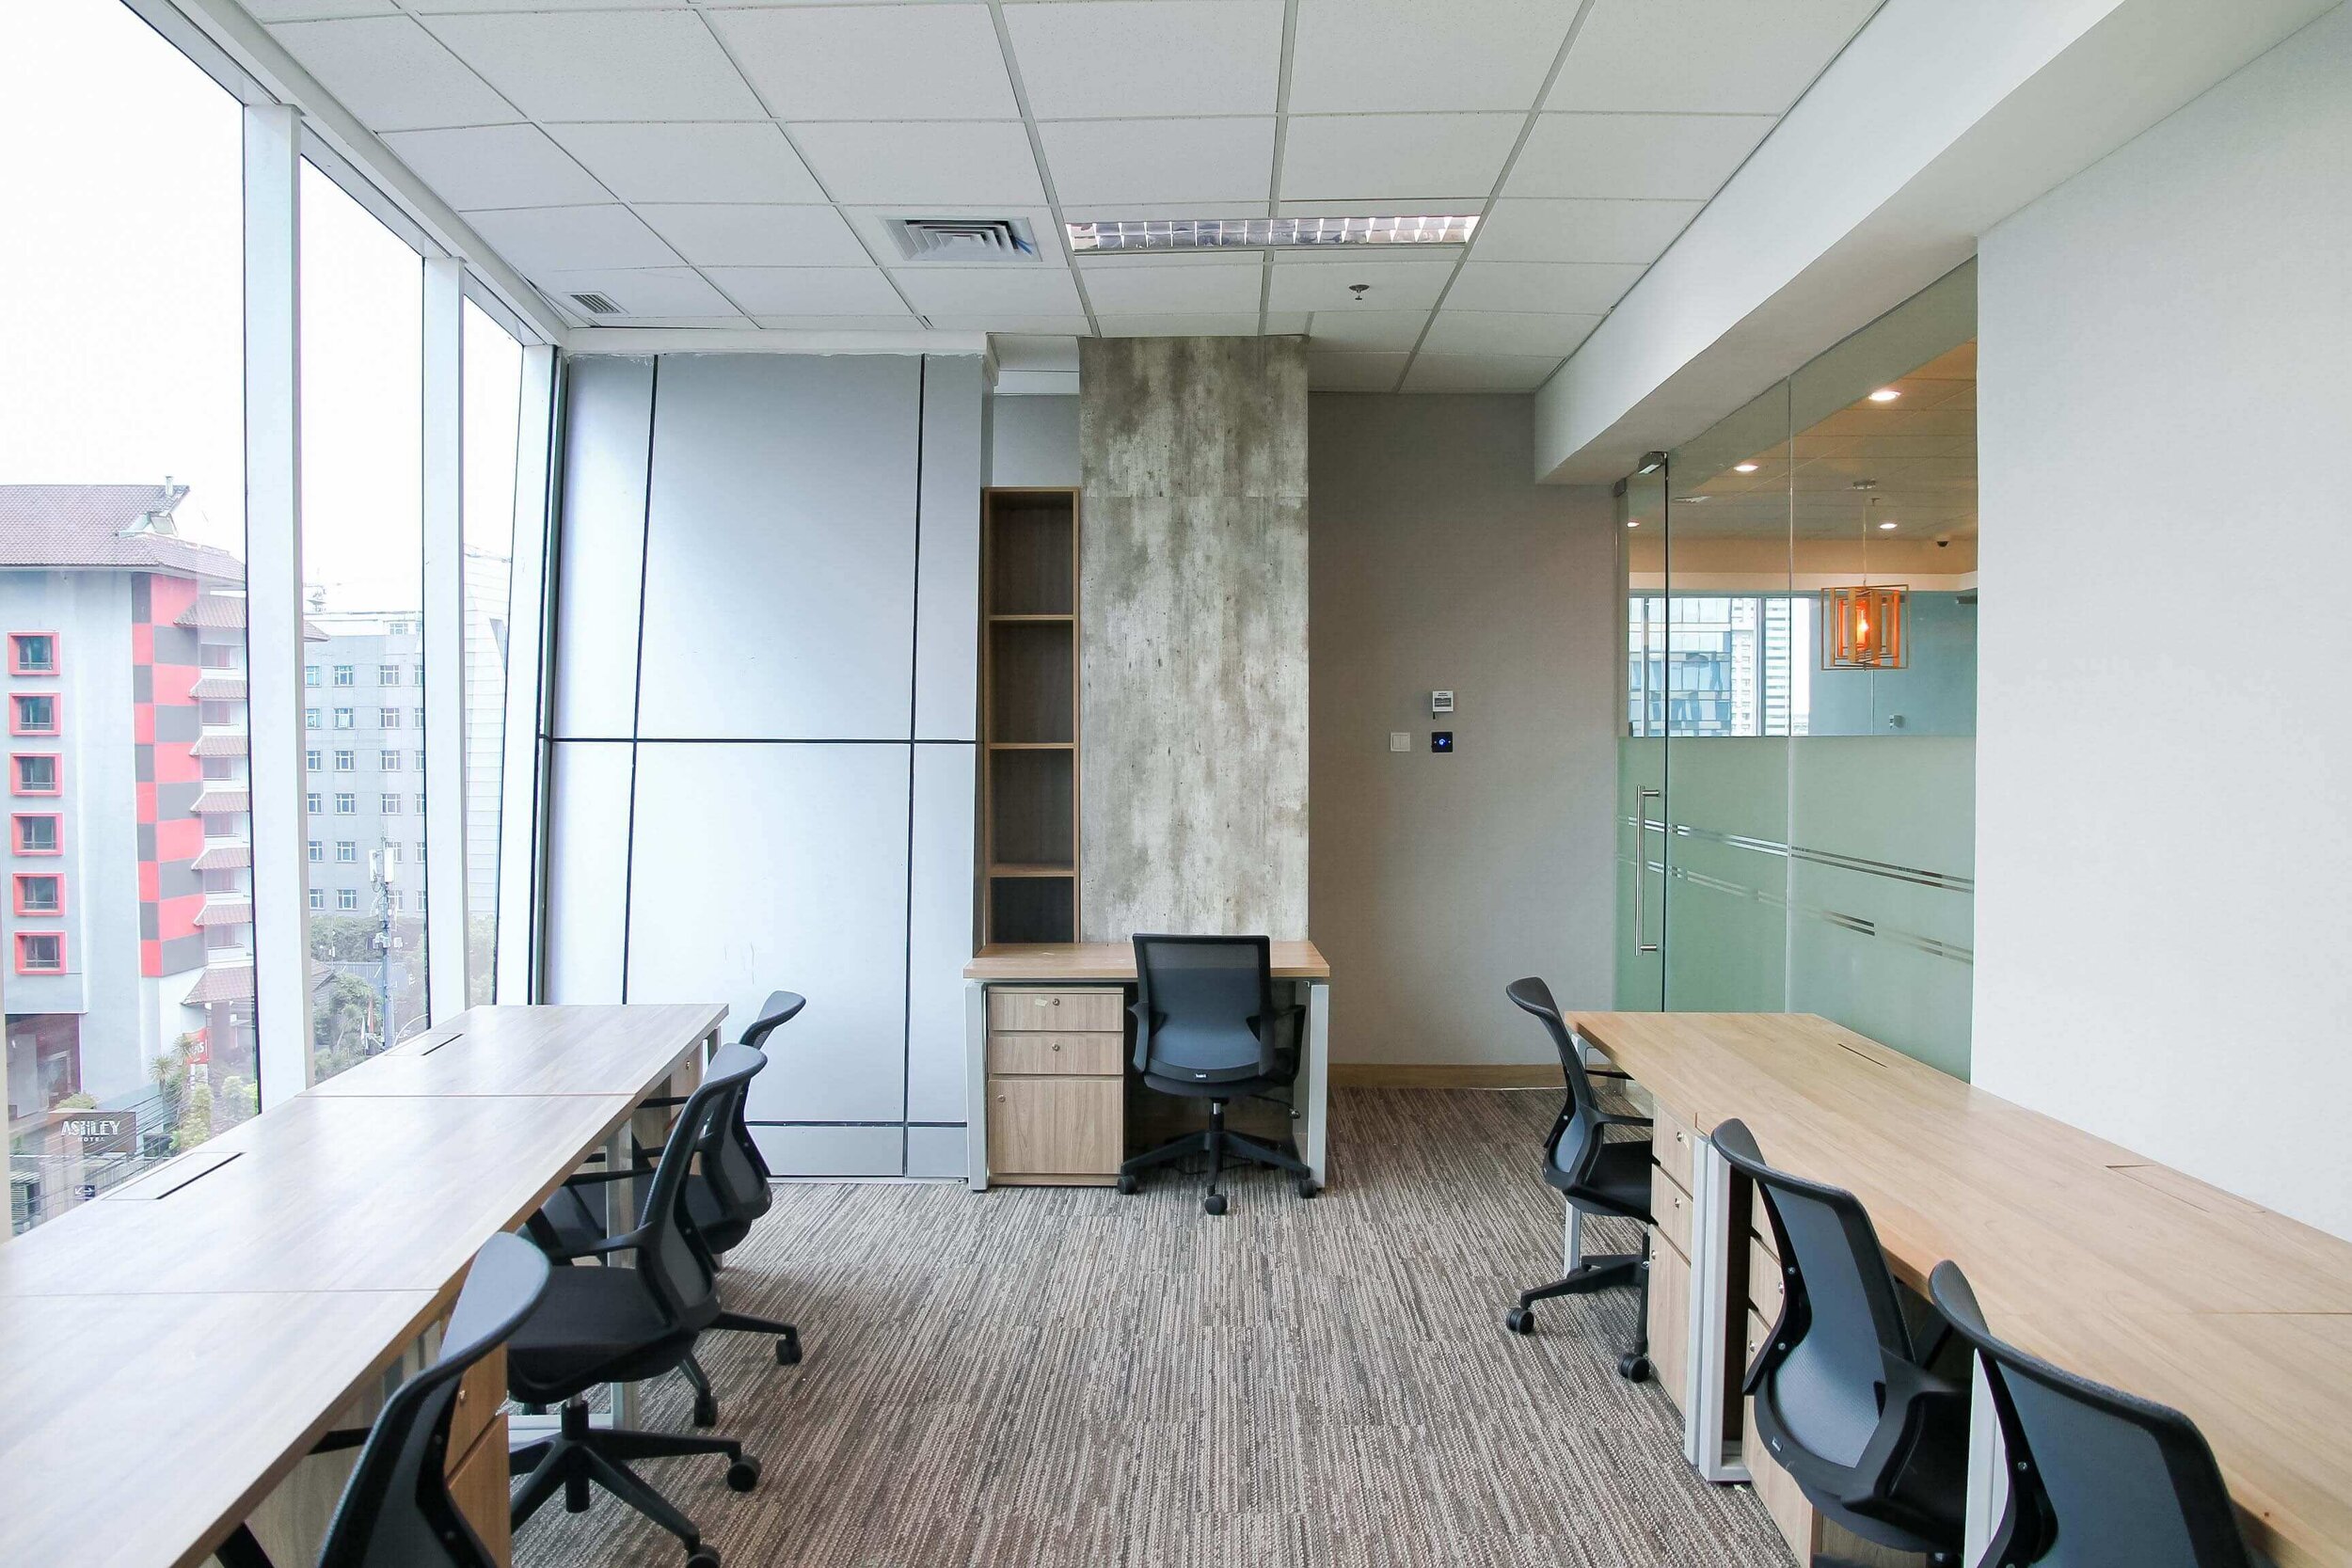 Avenue8 Offices: Rent Private Offices, Coworking Space, Virtual Office & Meeting  Room in Jakarta — Avenue8 Offices